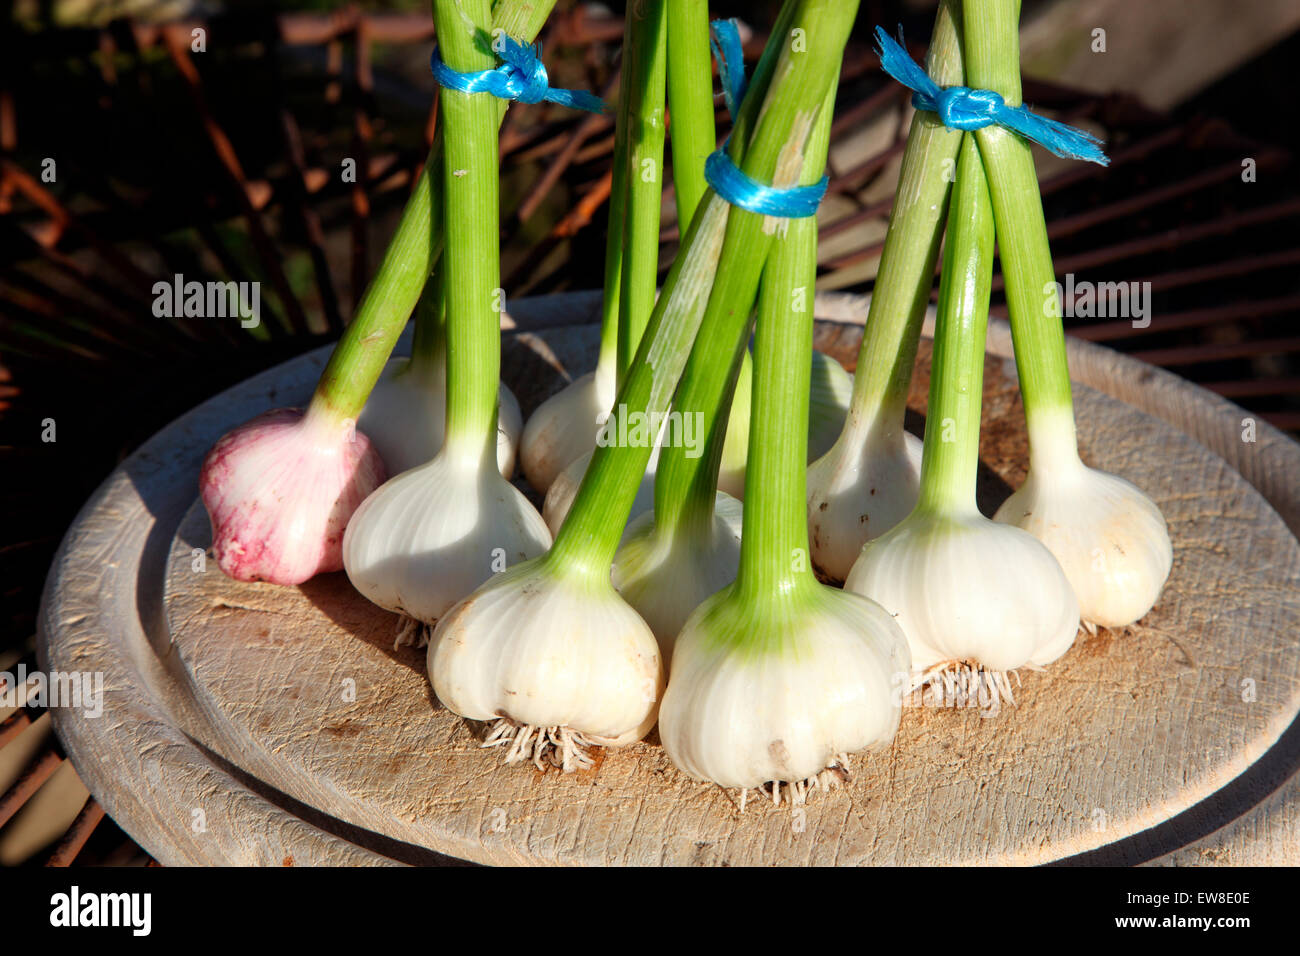 Freshly pulled garlic bunches Stock Photo